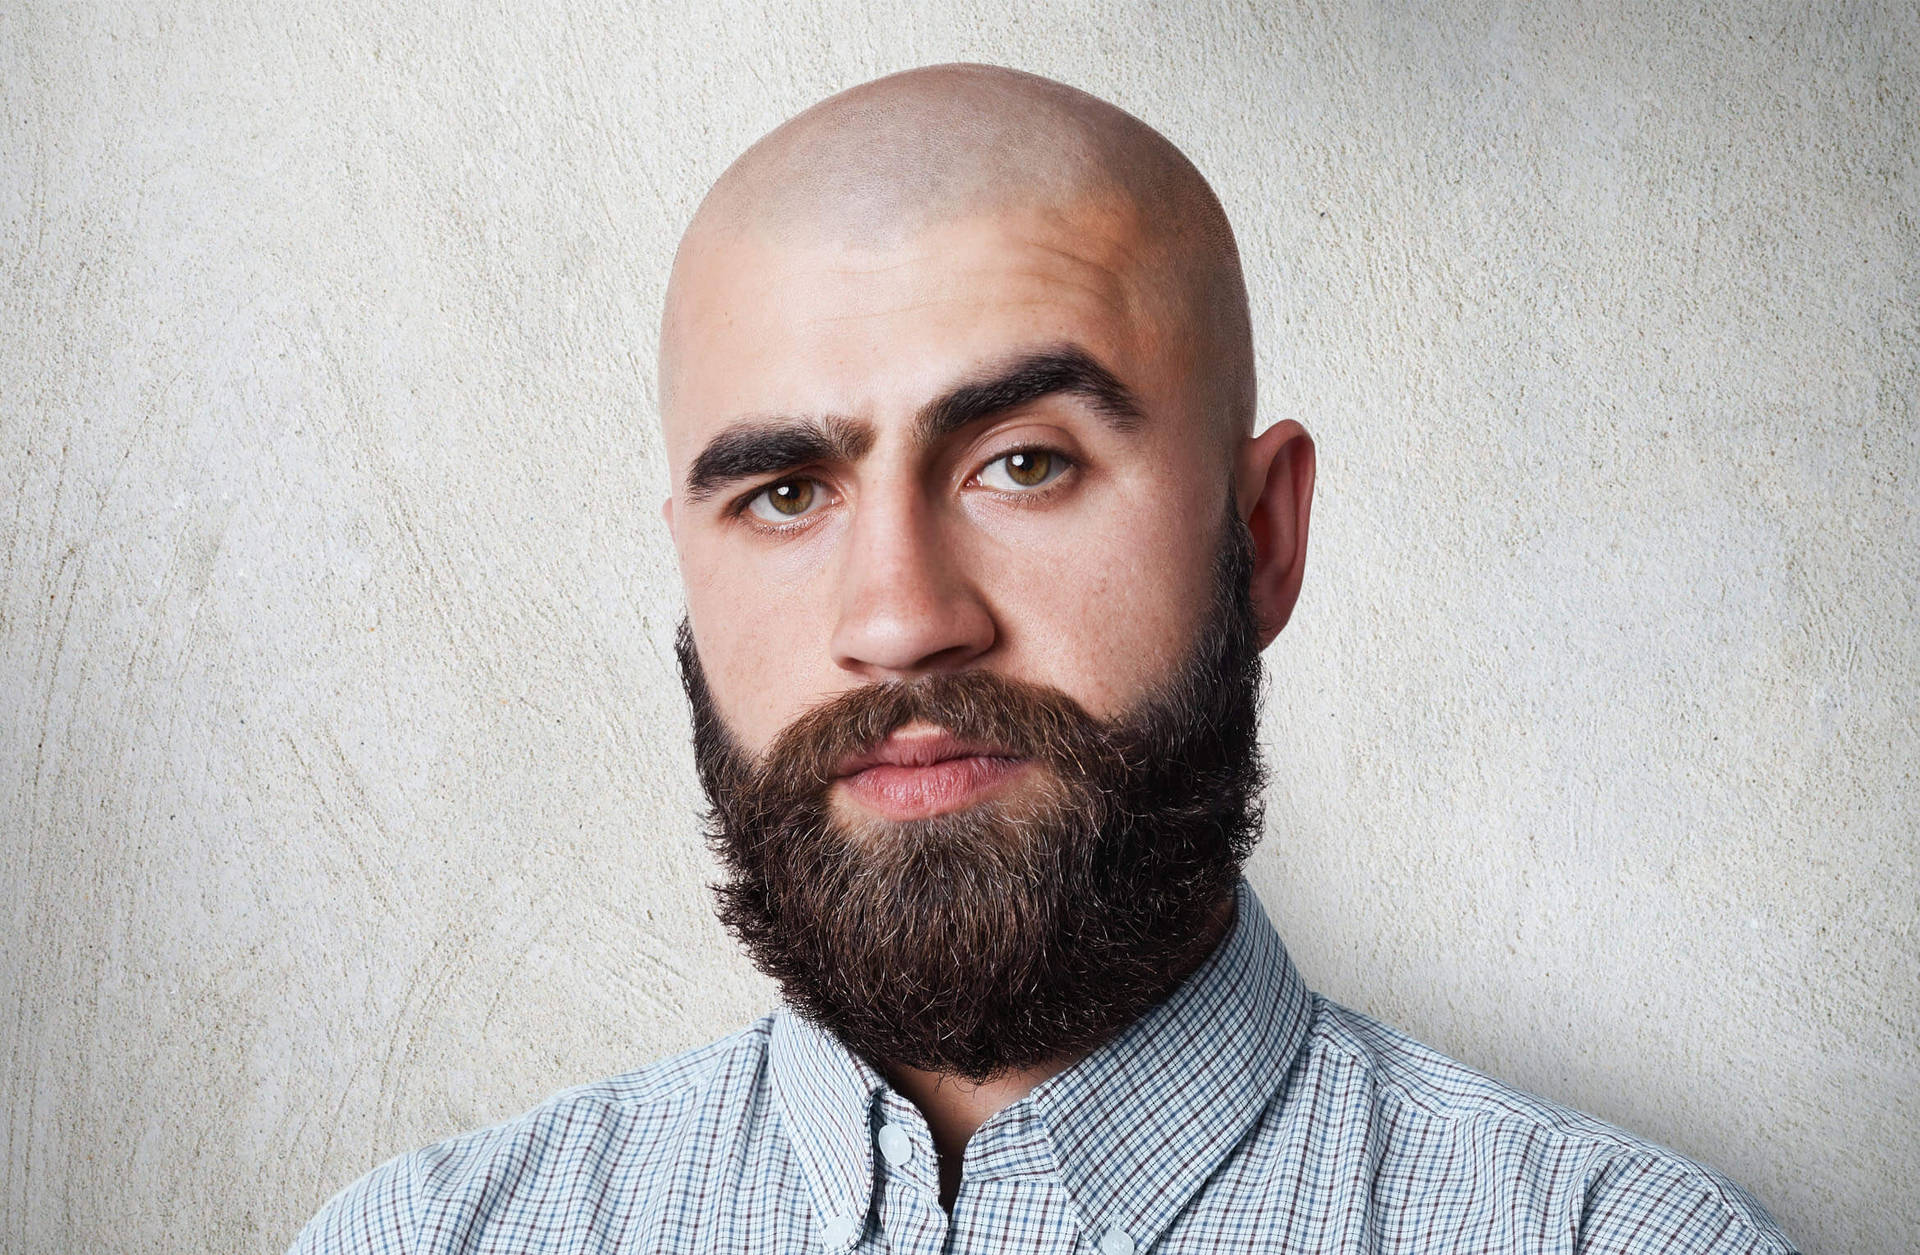 Bald Man With Thick Beard Picture